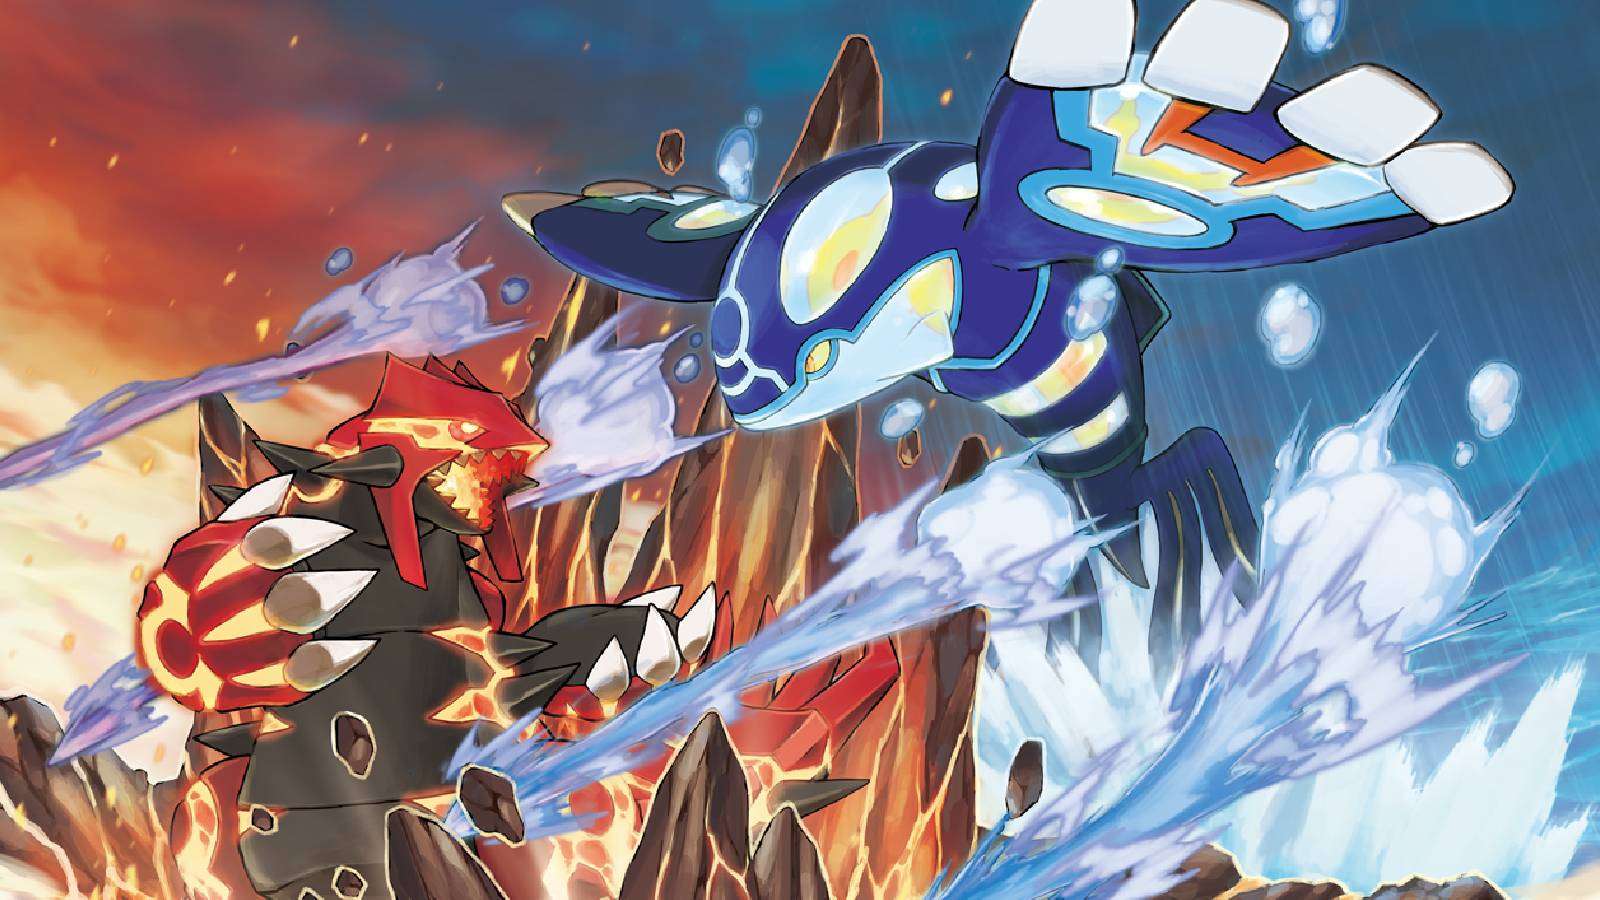 The Legendary Pokemon Kyogre and Groudon are locked in a dramatic battle in key art for Pokemon Omega Ruby and Alpha Sapphire